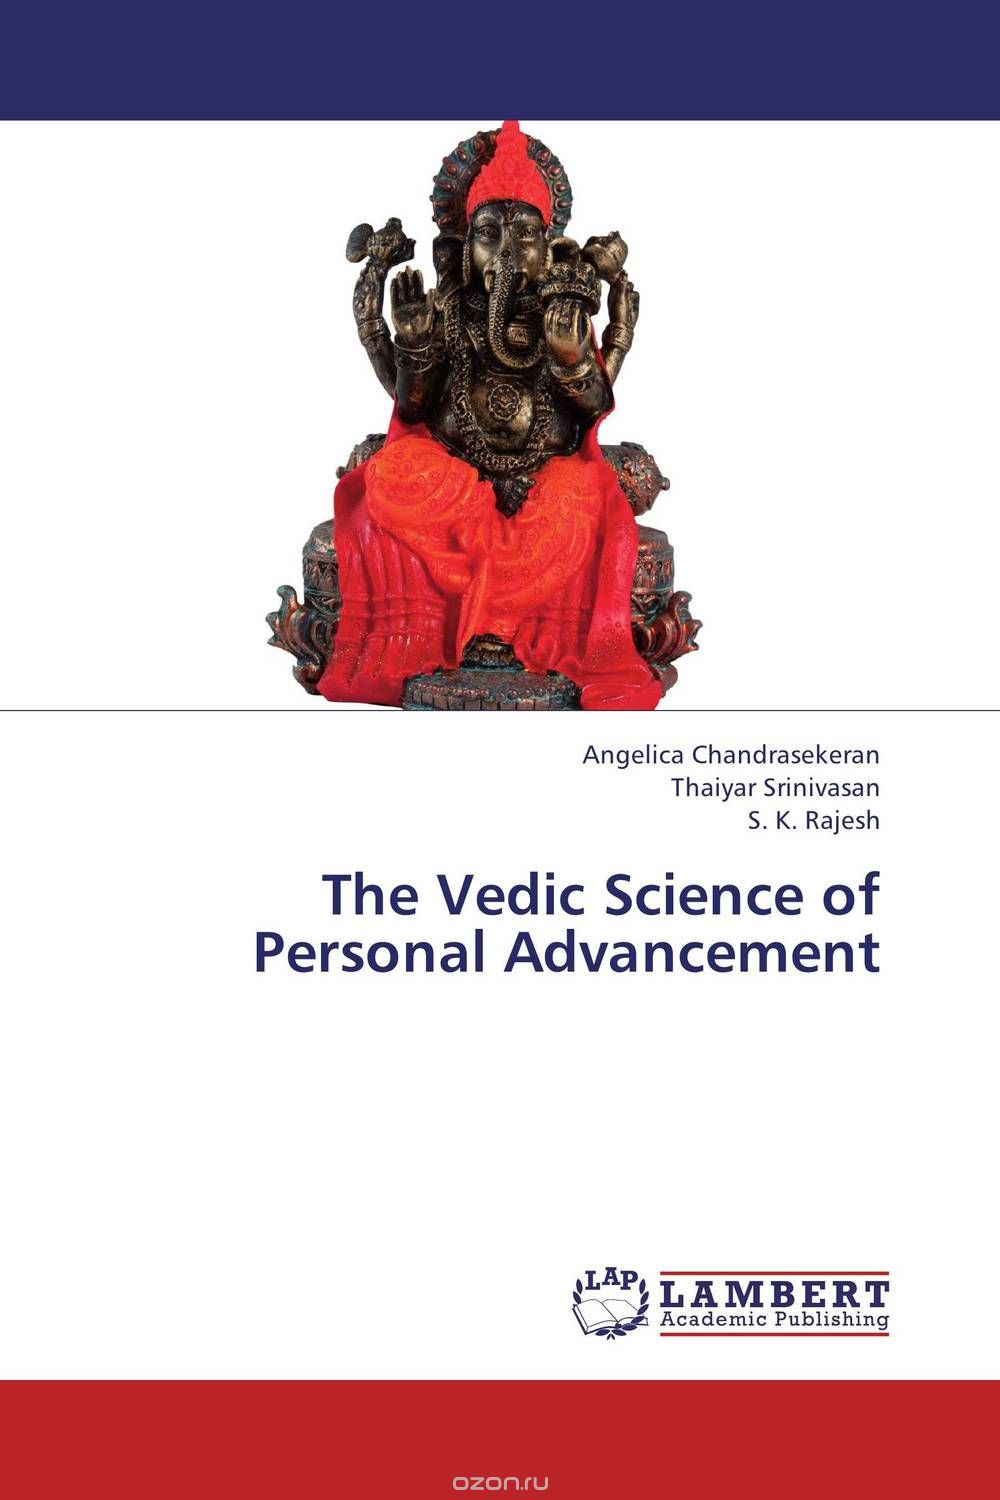 The Vedic Science of Personal Advancement